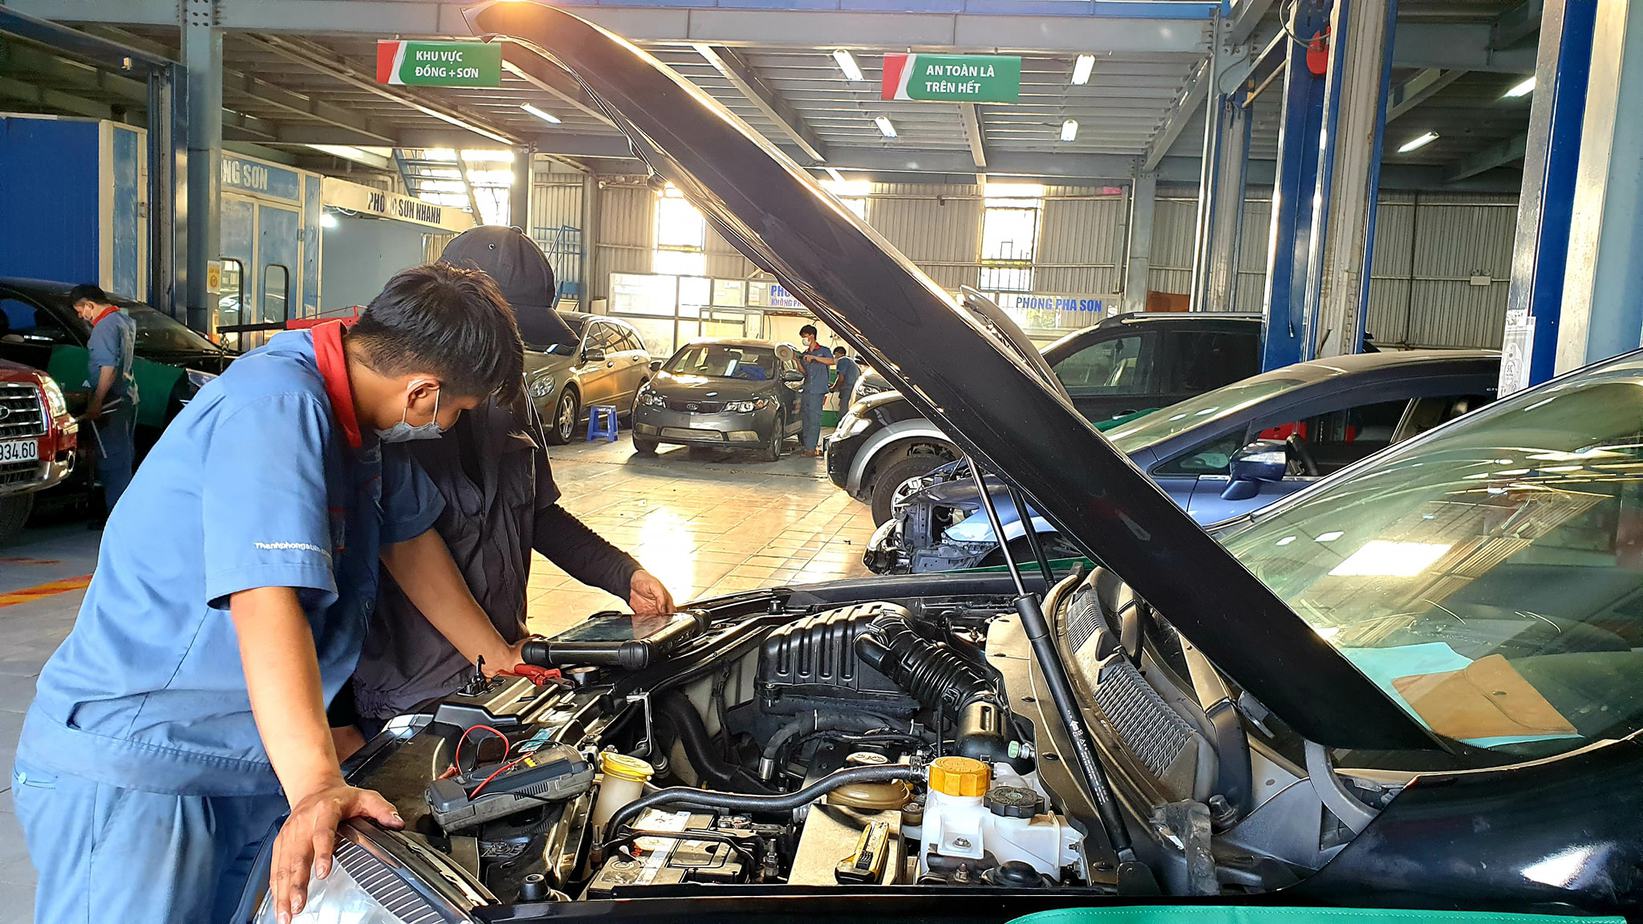 Learn to Repair Cars while Learning and Doing